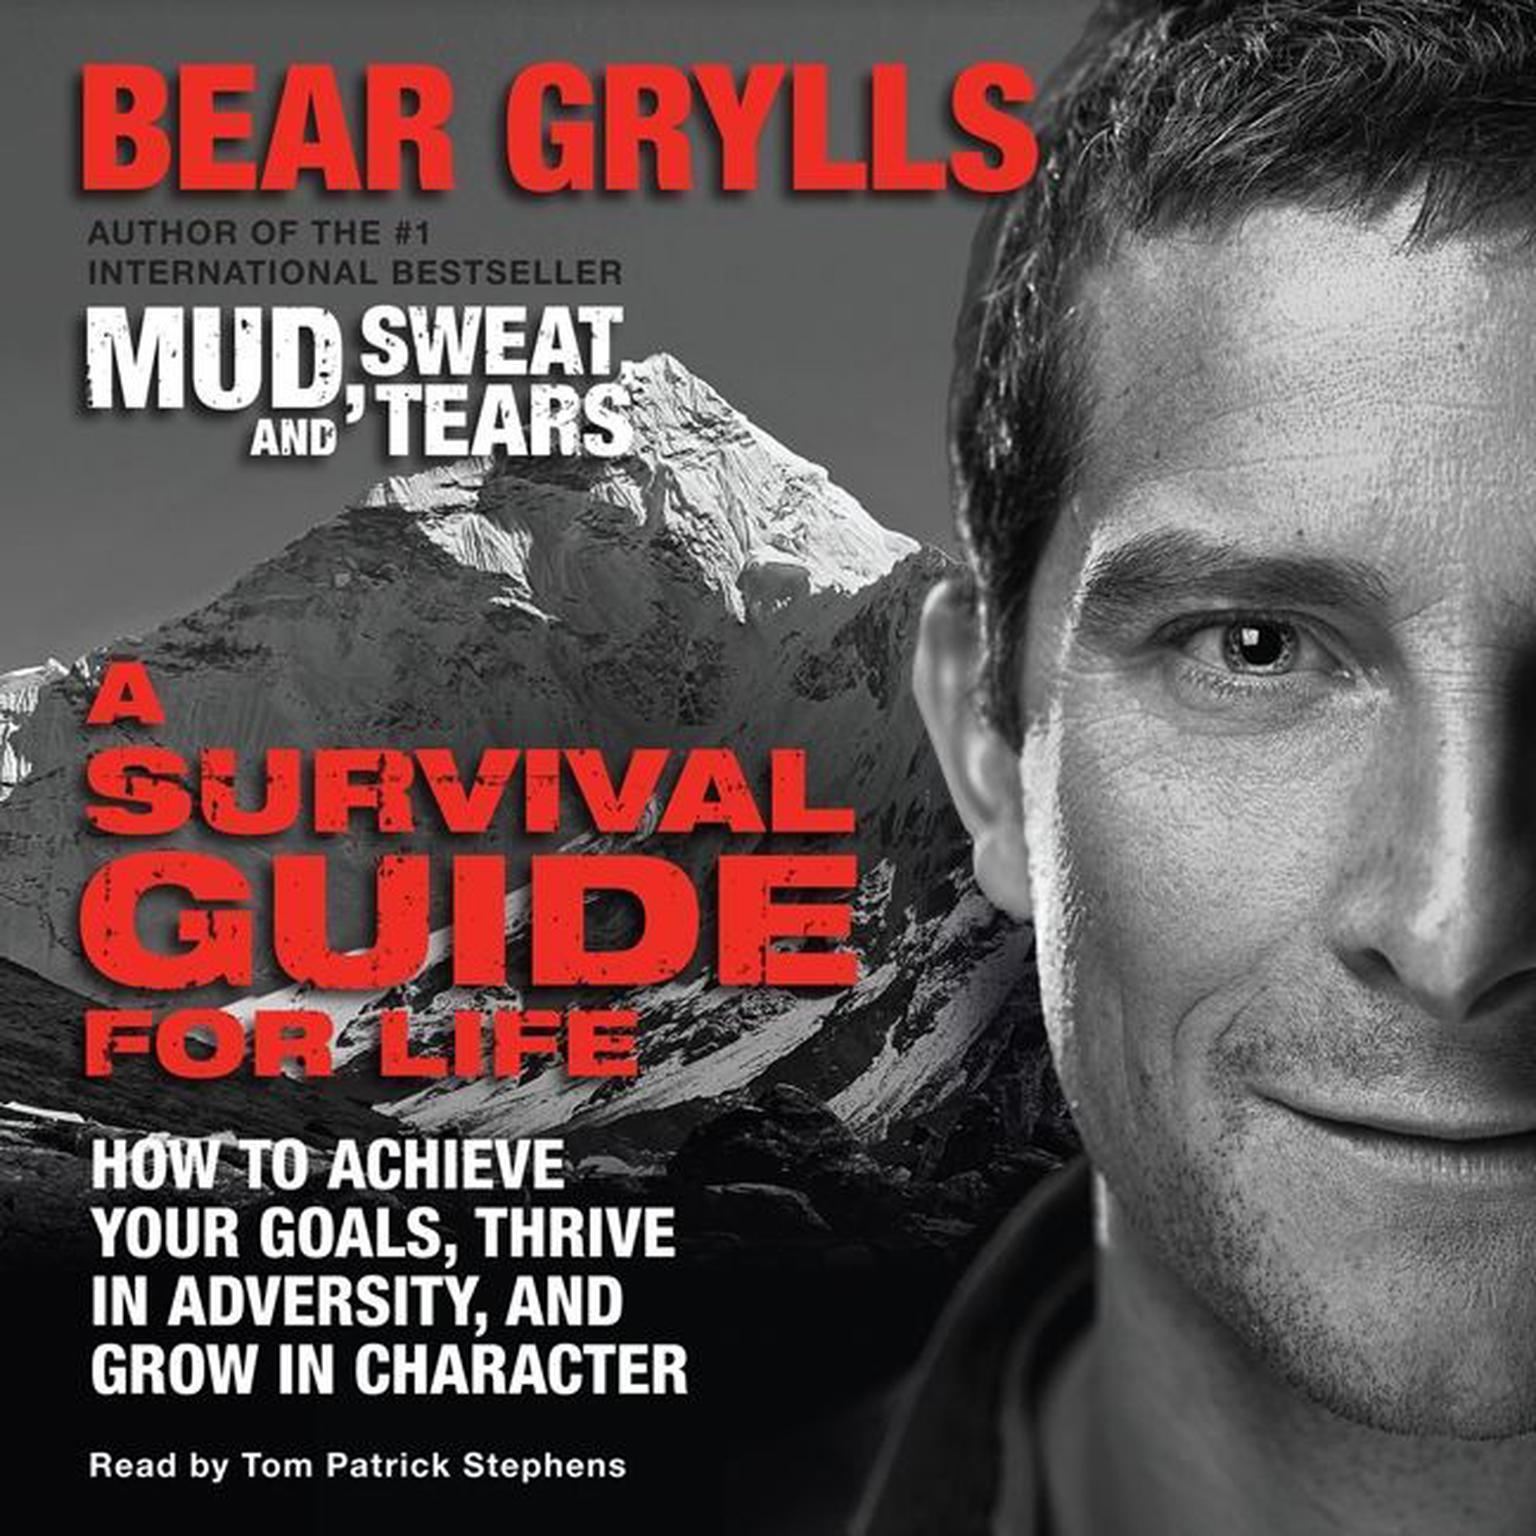 A Survival Guide for Life: How to Achieve Your Goals, Thrive in Adversity, and Grow in Character Audiobook, by Bear Grylls